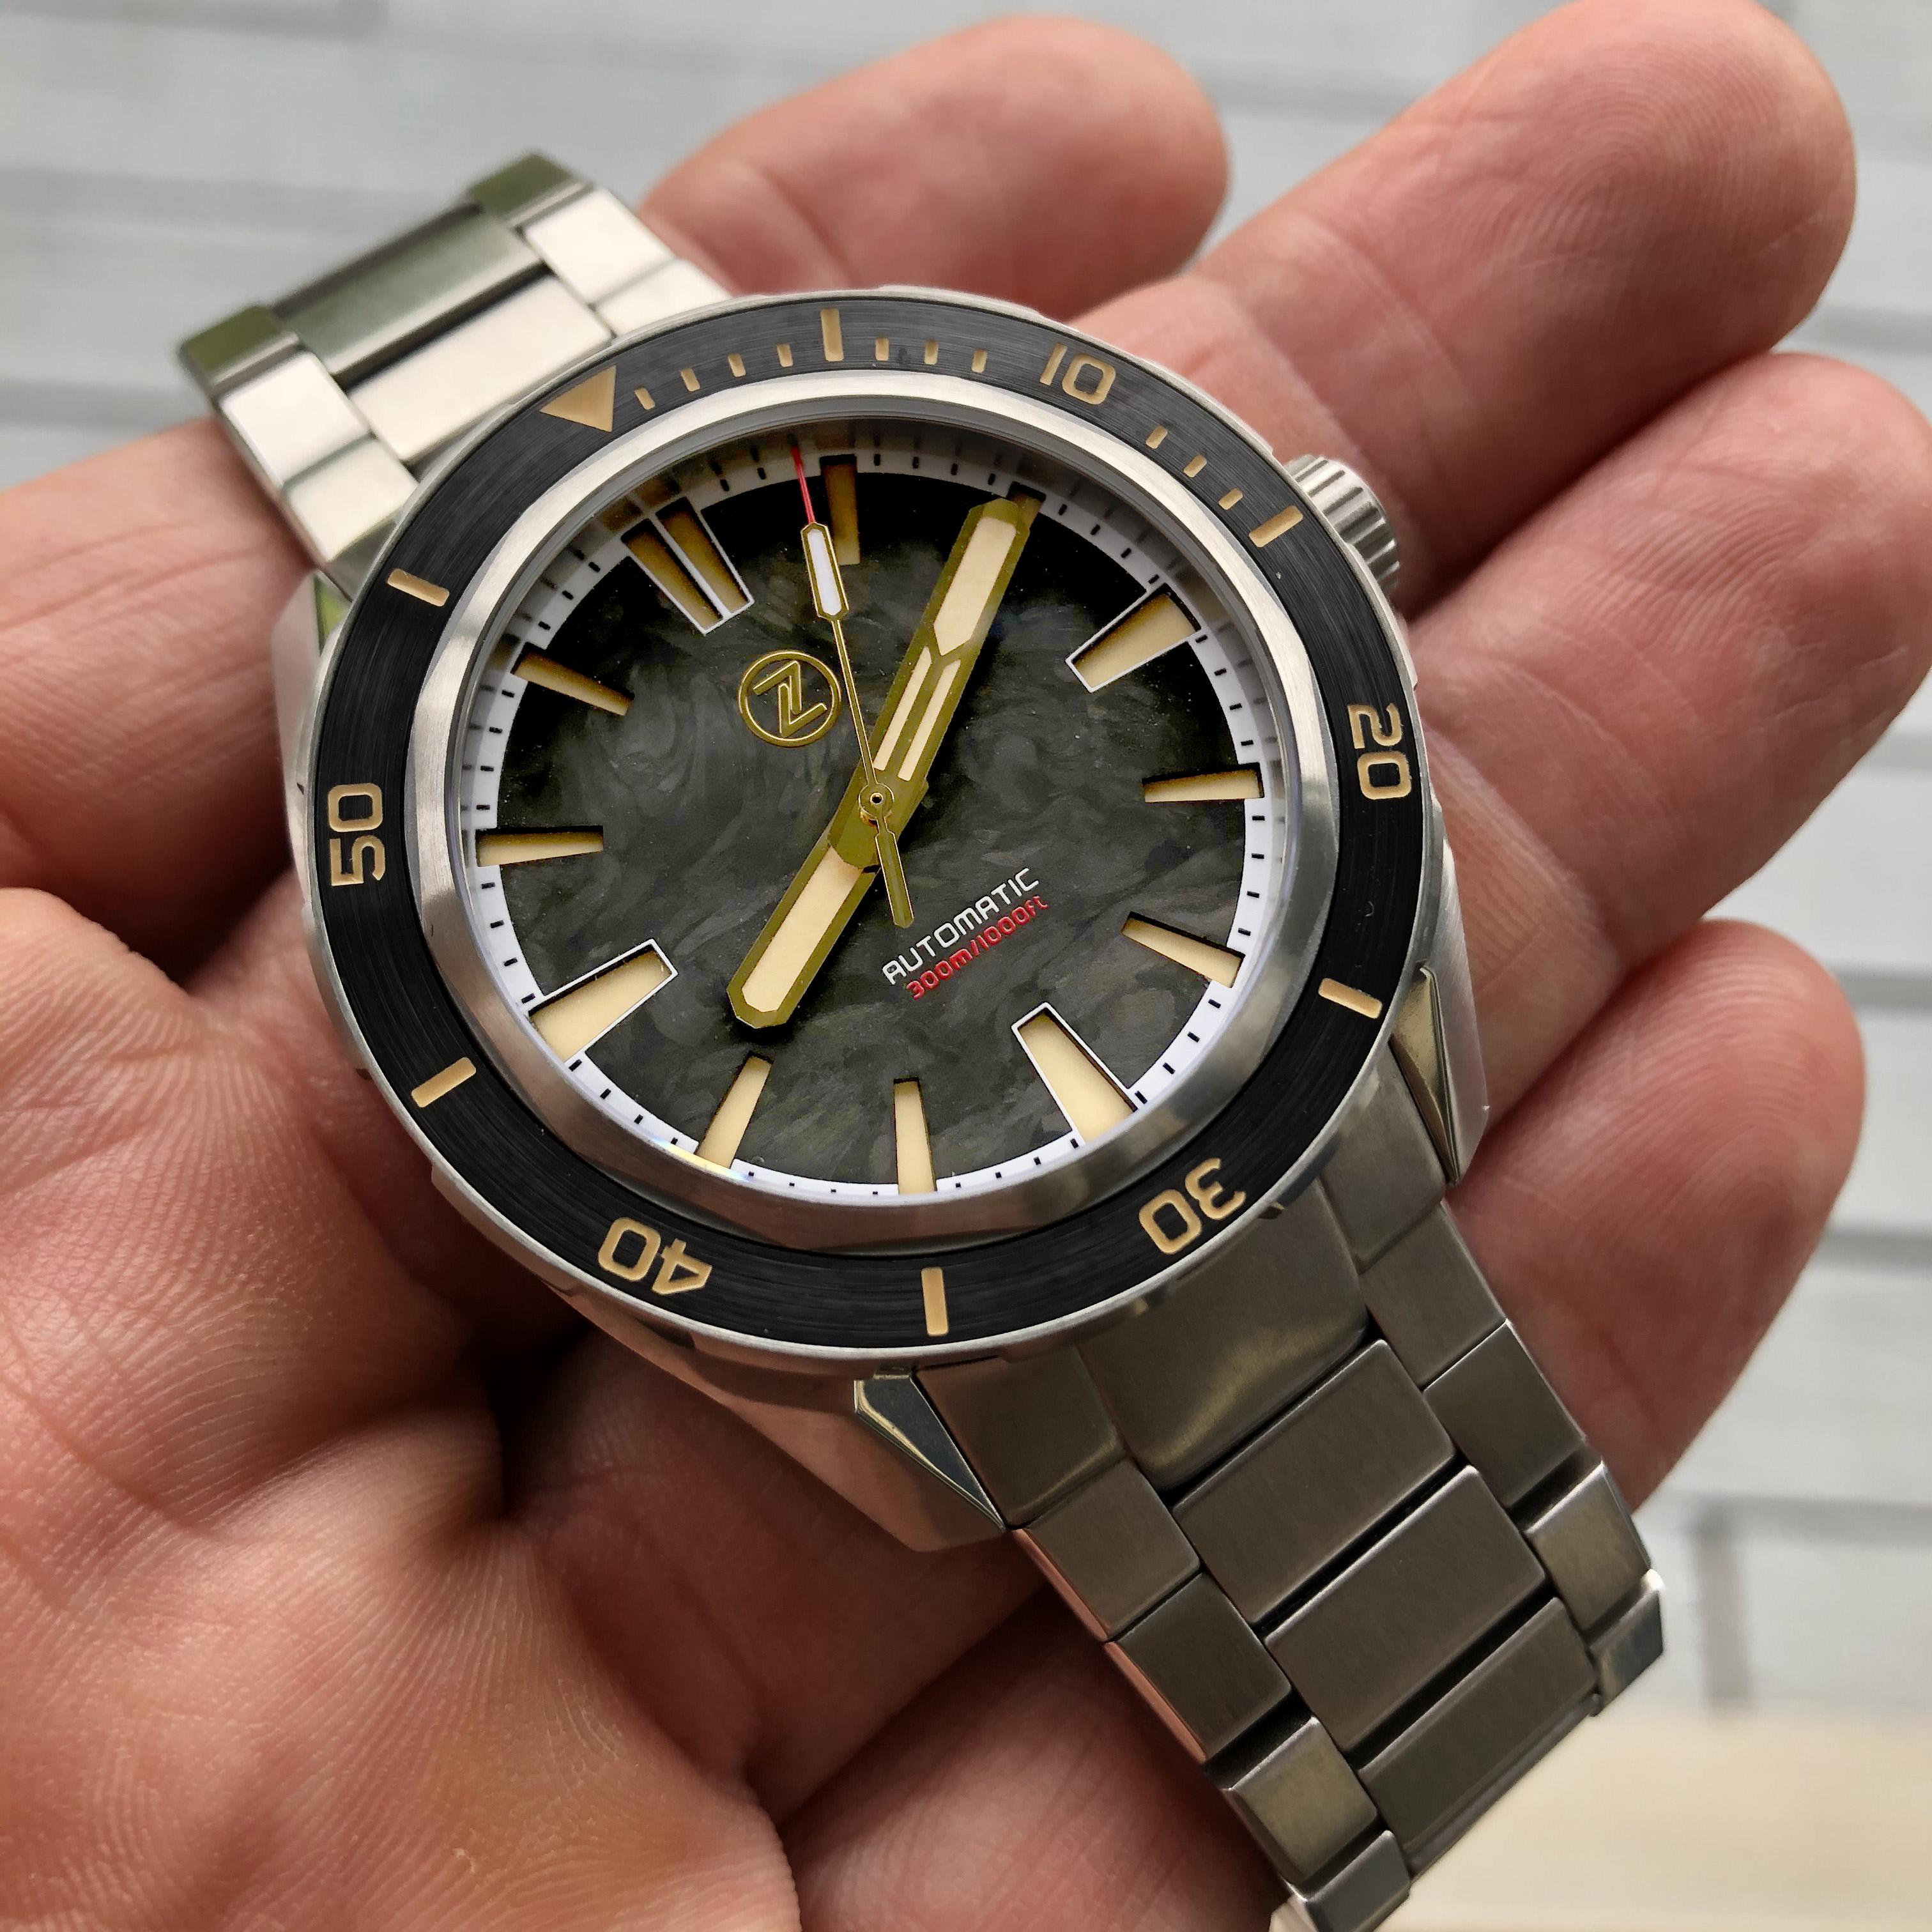 Ejendomsret lanthan Justerbar Why the Seiko NH35 is used by the best microbrands